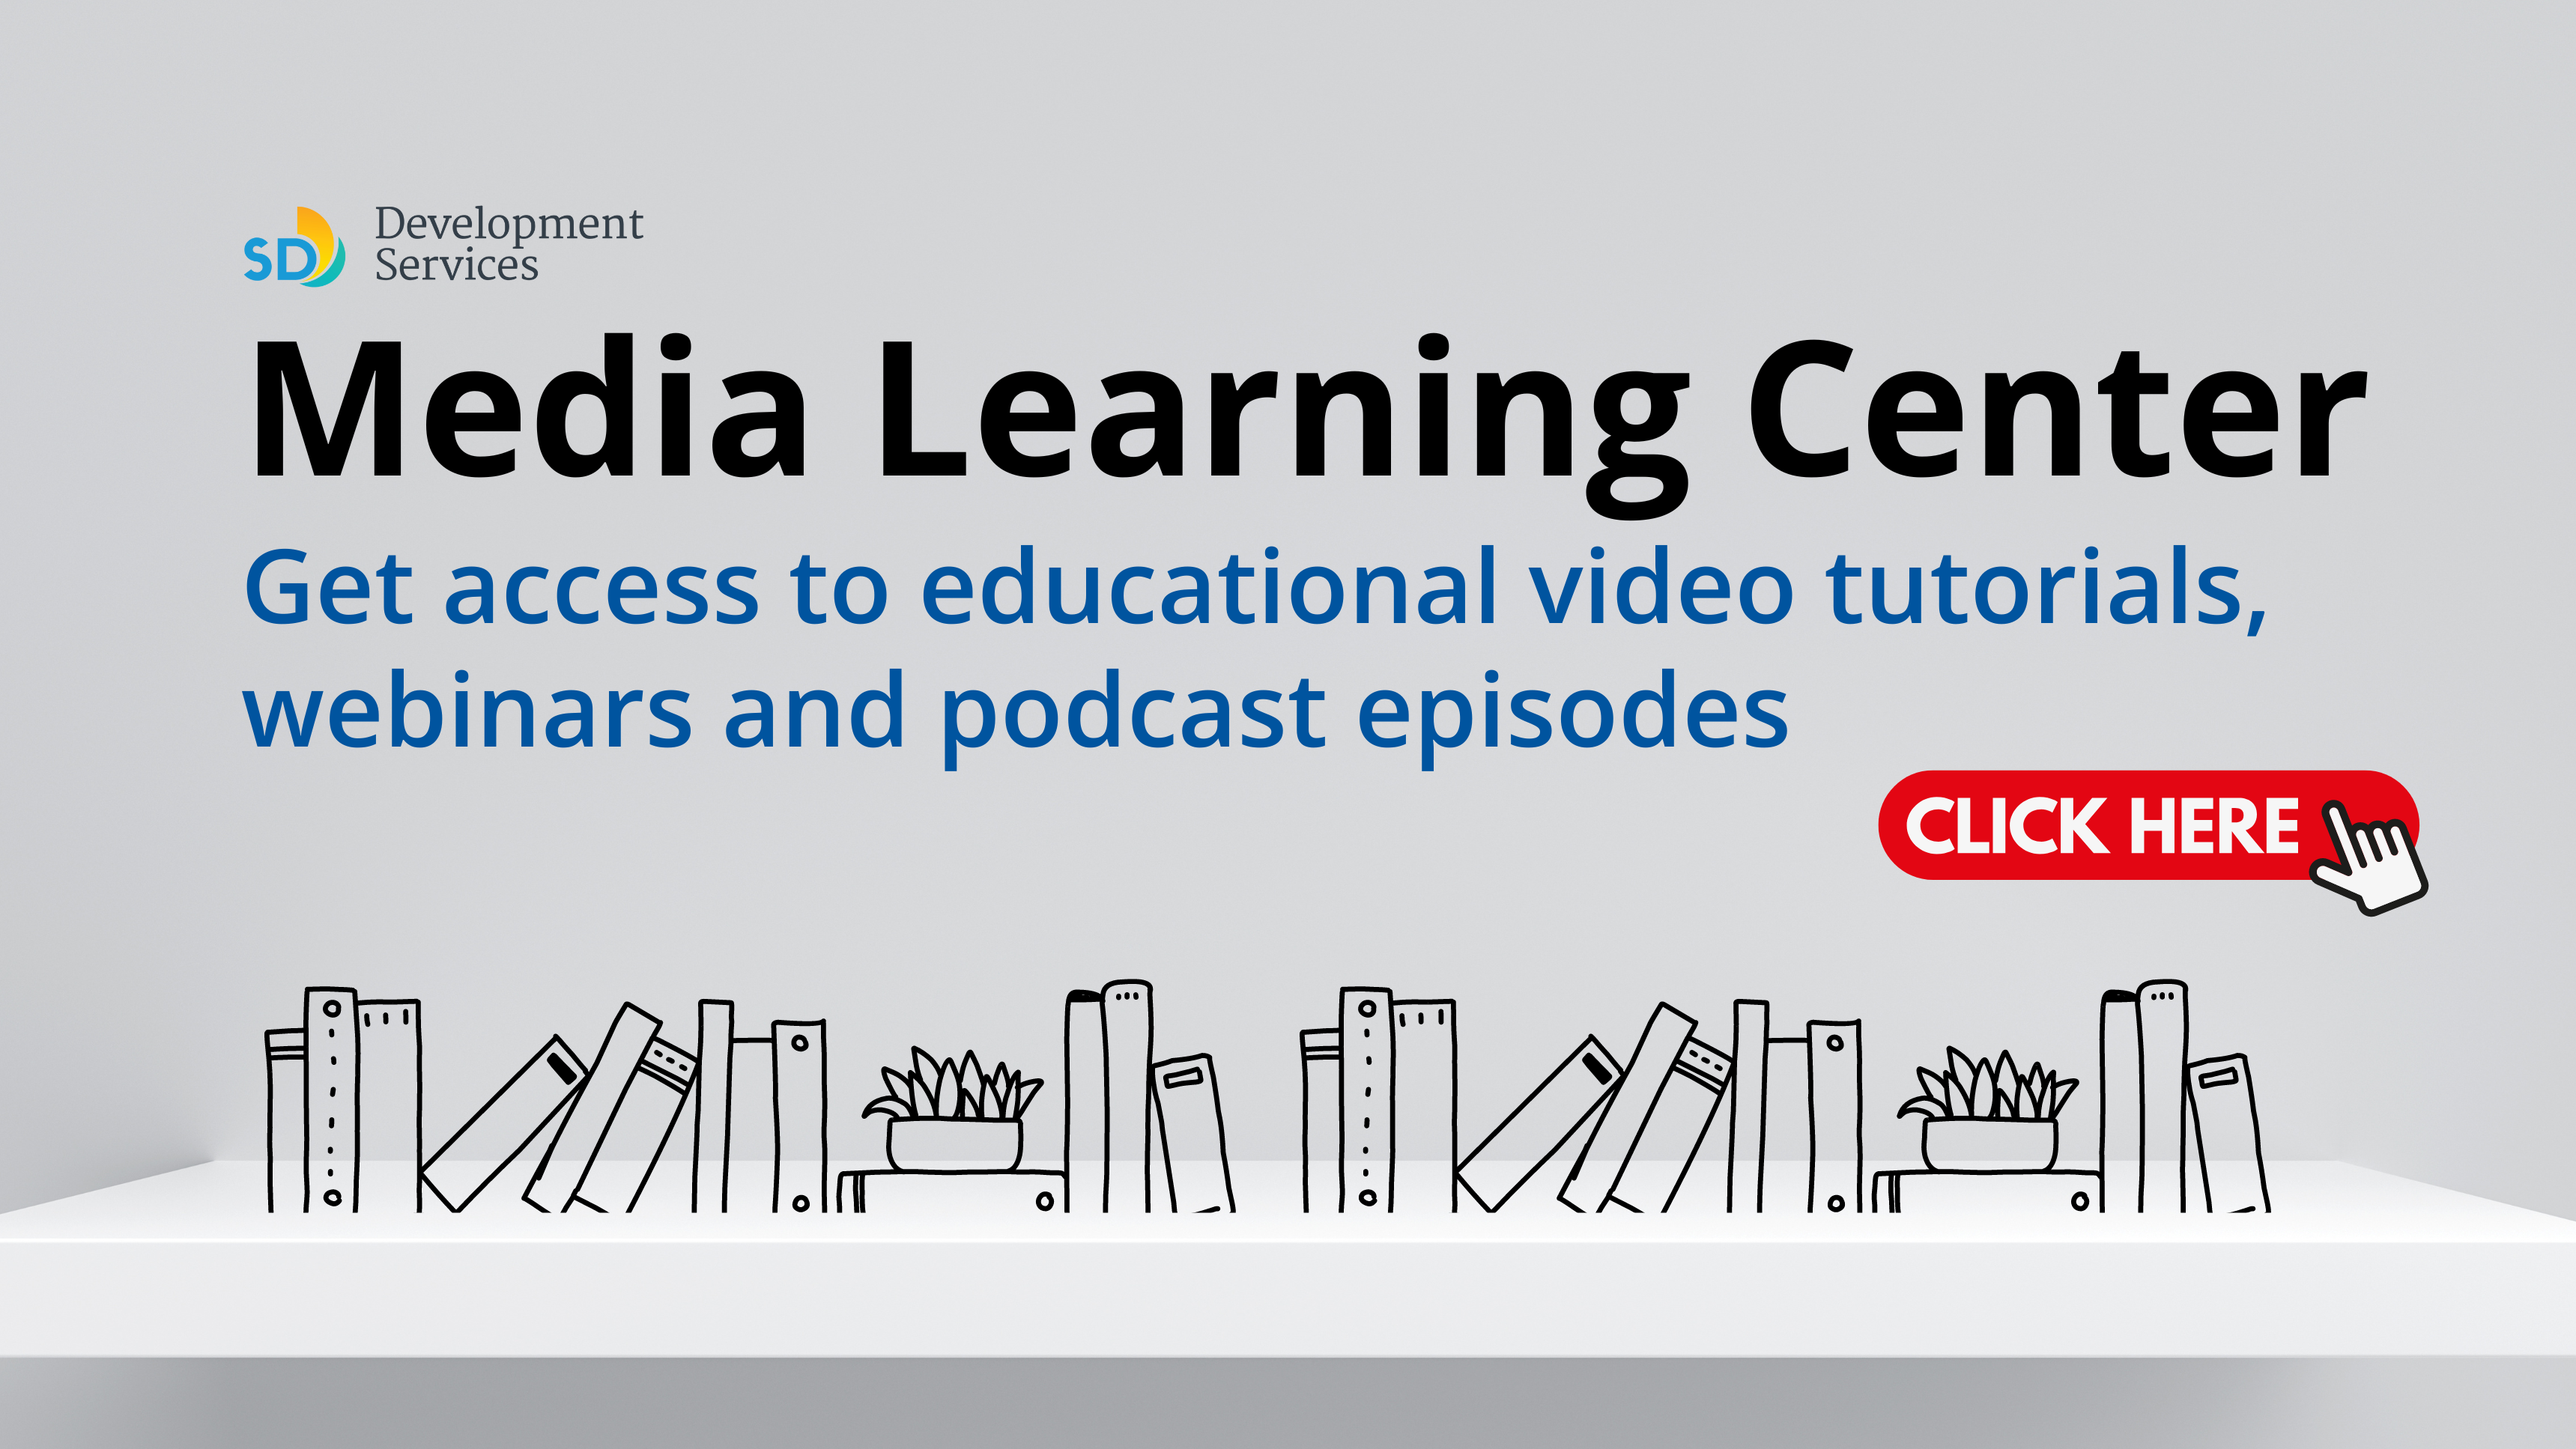 Media Learning Center - Get access to educational video tutorials, webinars and podcast episodes